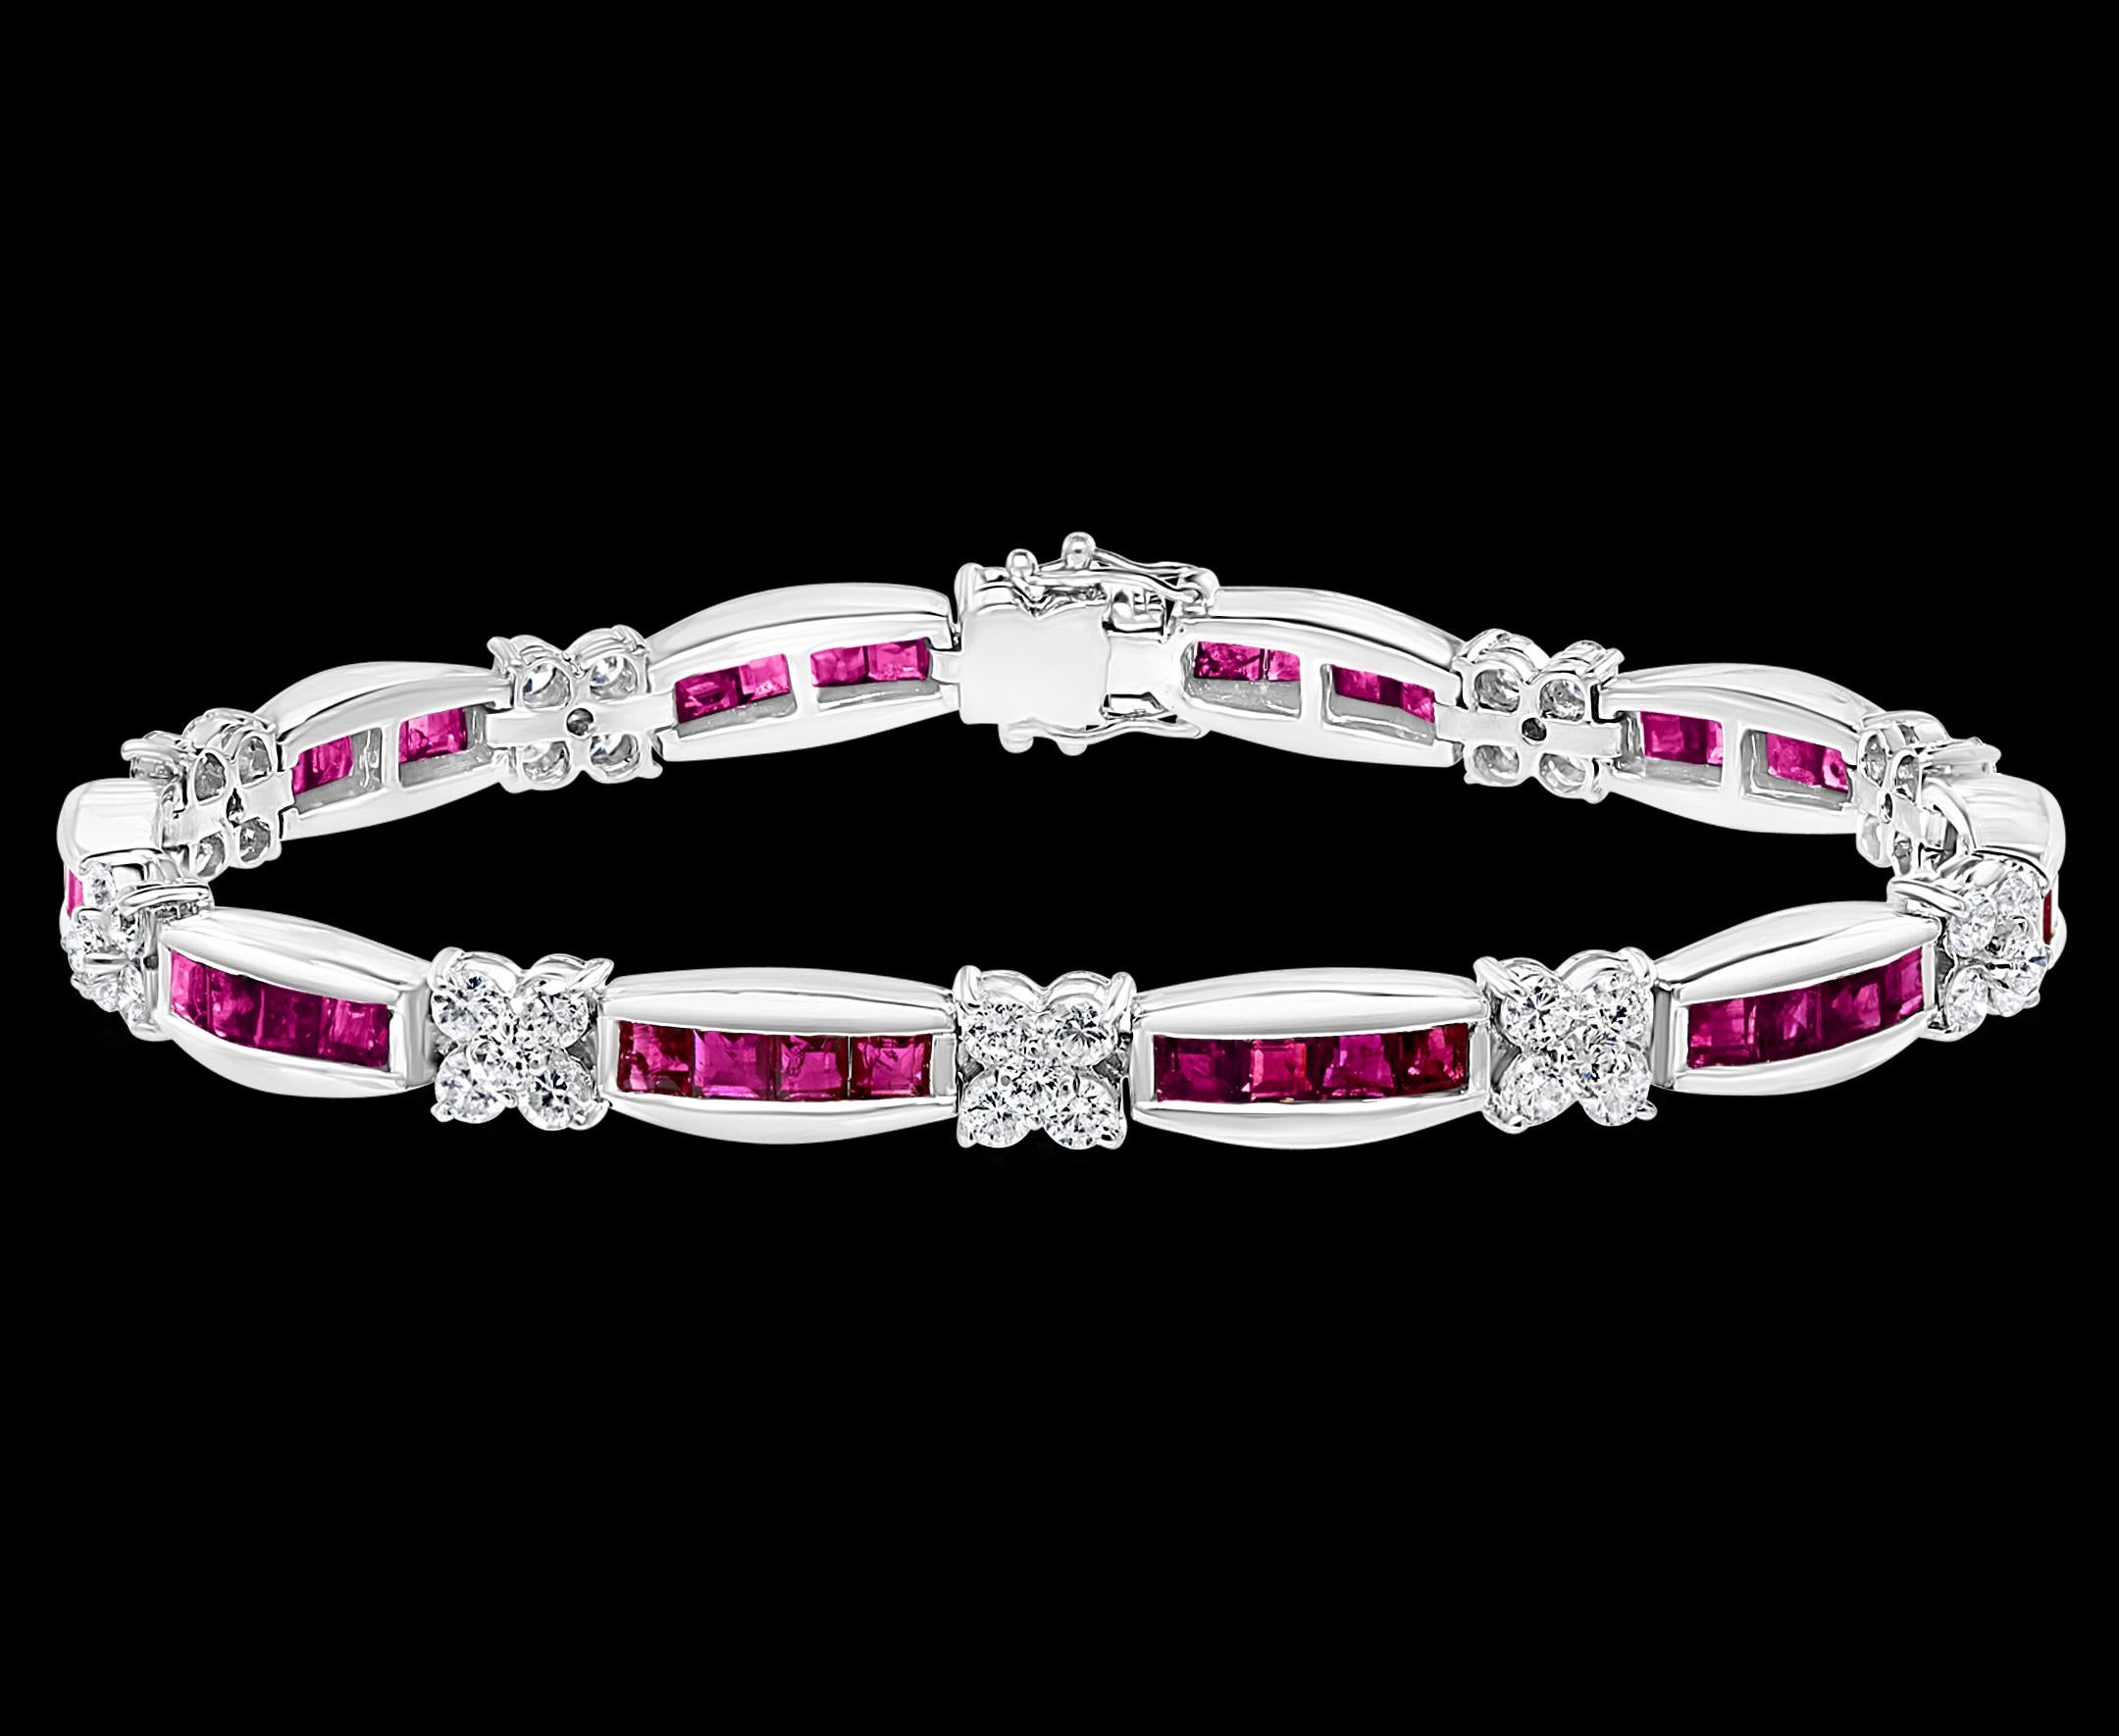  A beautiful ruby and diamond line bracelet set in 18 karat white gold. 
The bracelet is made up of 40  princess cut rubies Totaling Approximately  5 ct. The rubies are set in horizontal rows of 4, with 10 rows in total. 
Each row is separated with